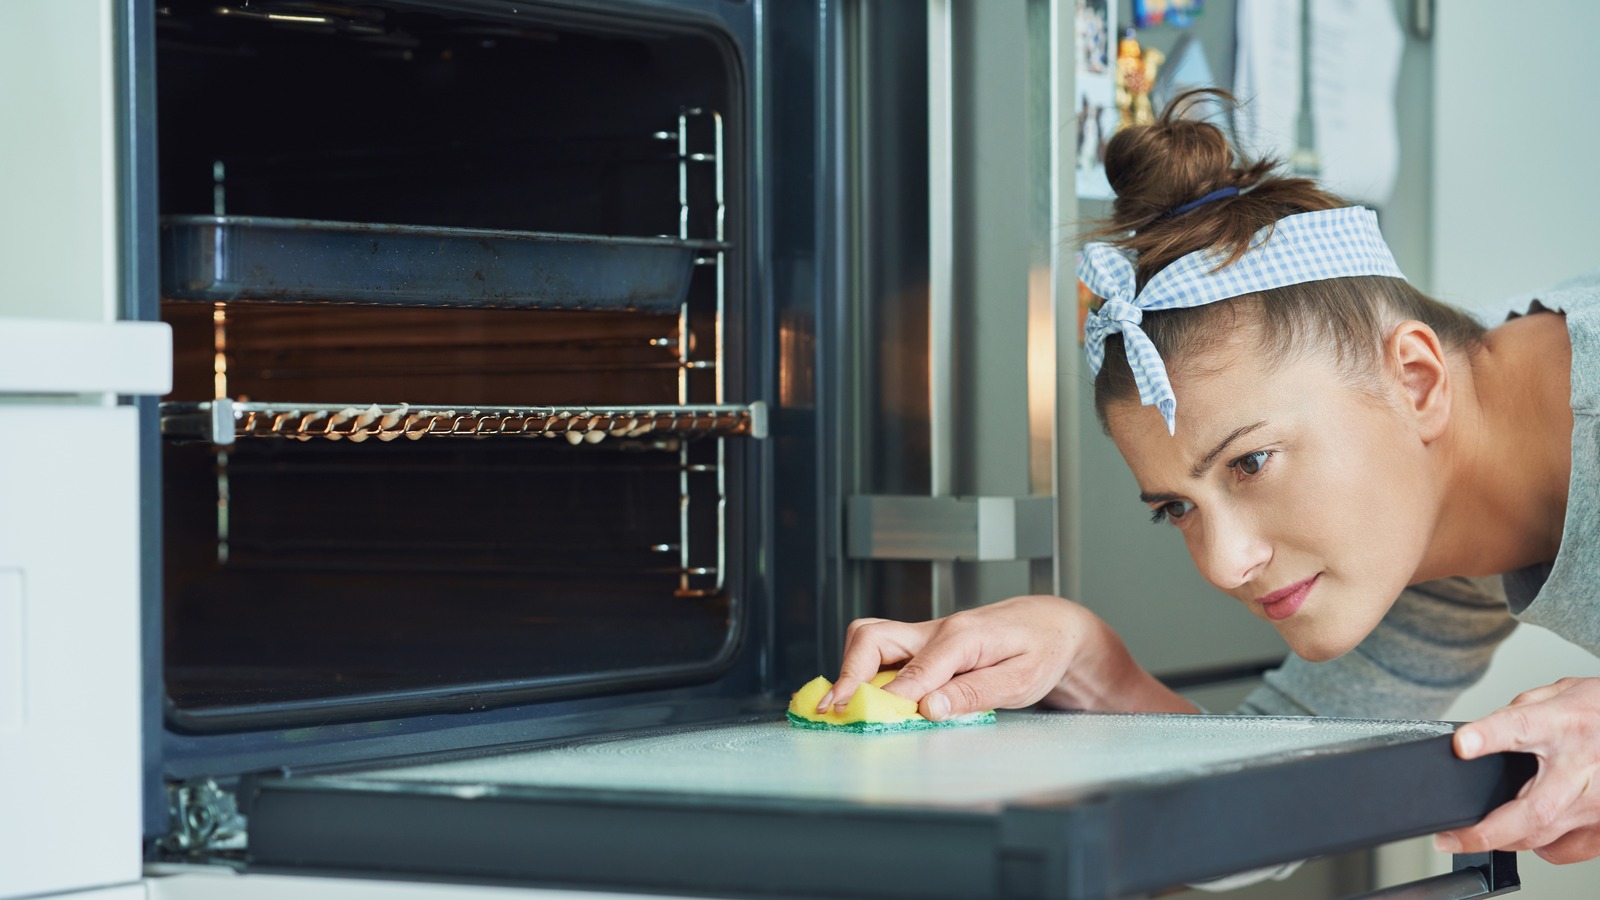 7 Easy and Effective Ways to Clean Your Oven Racks - Bob Vila